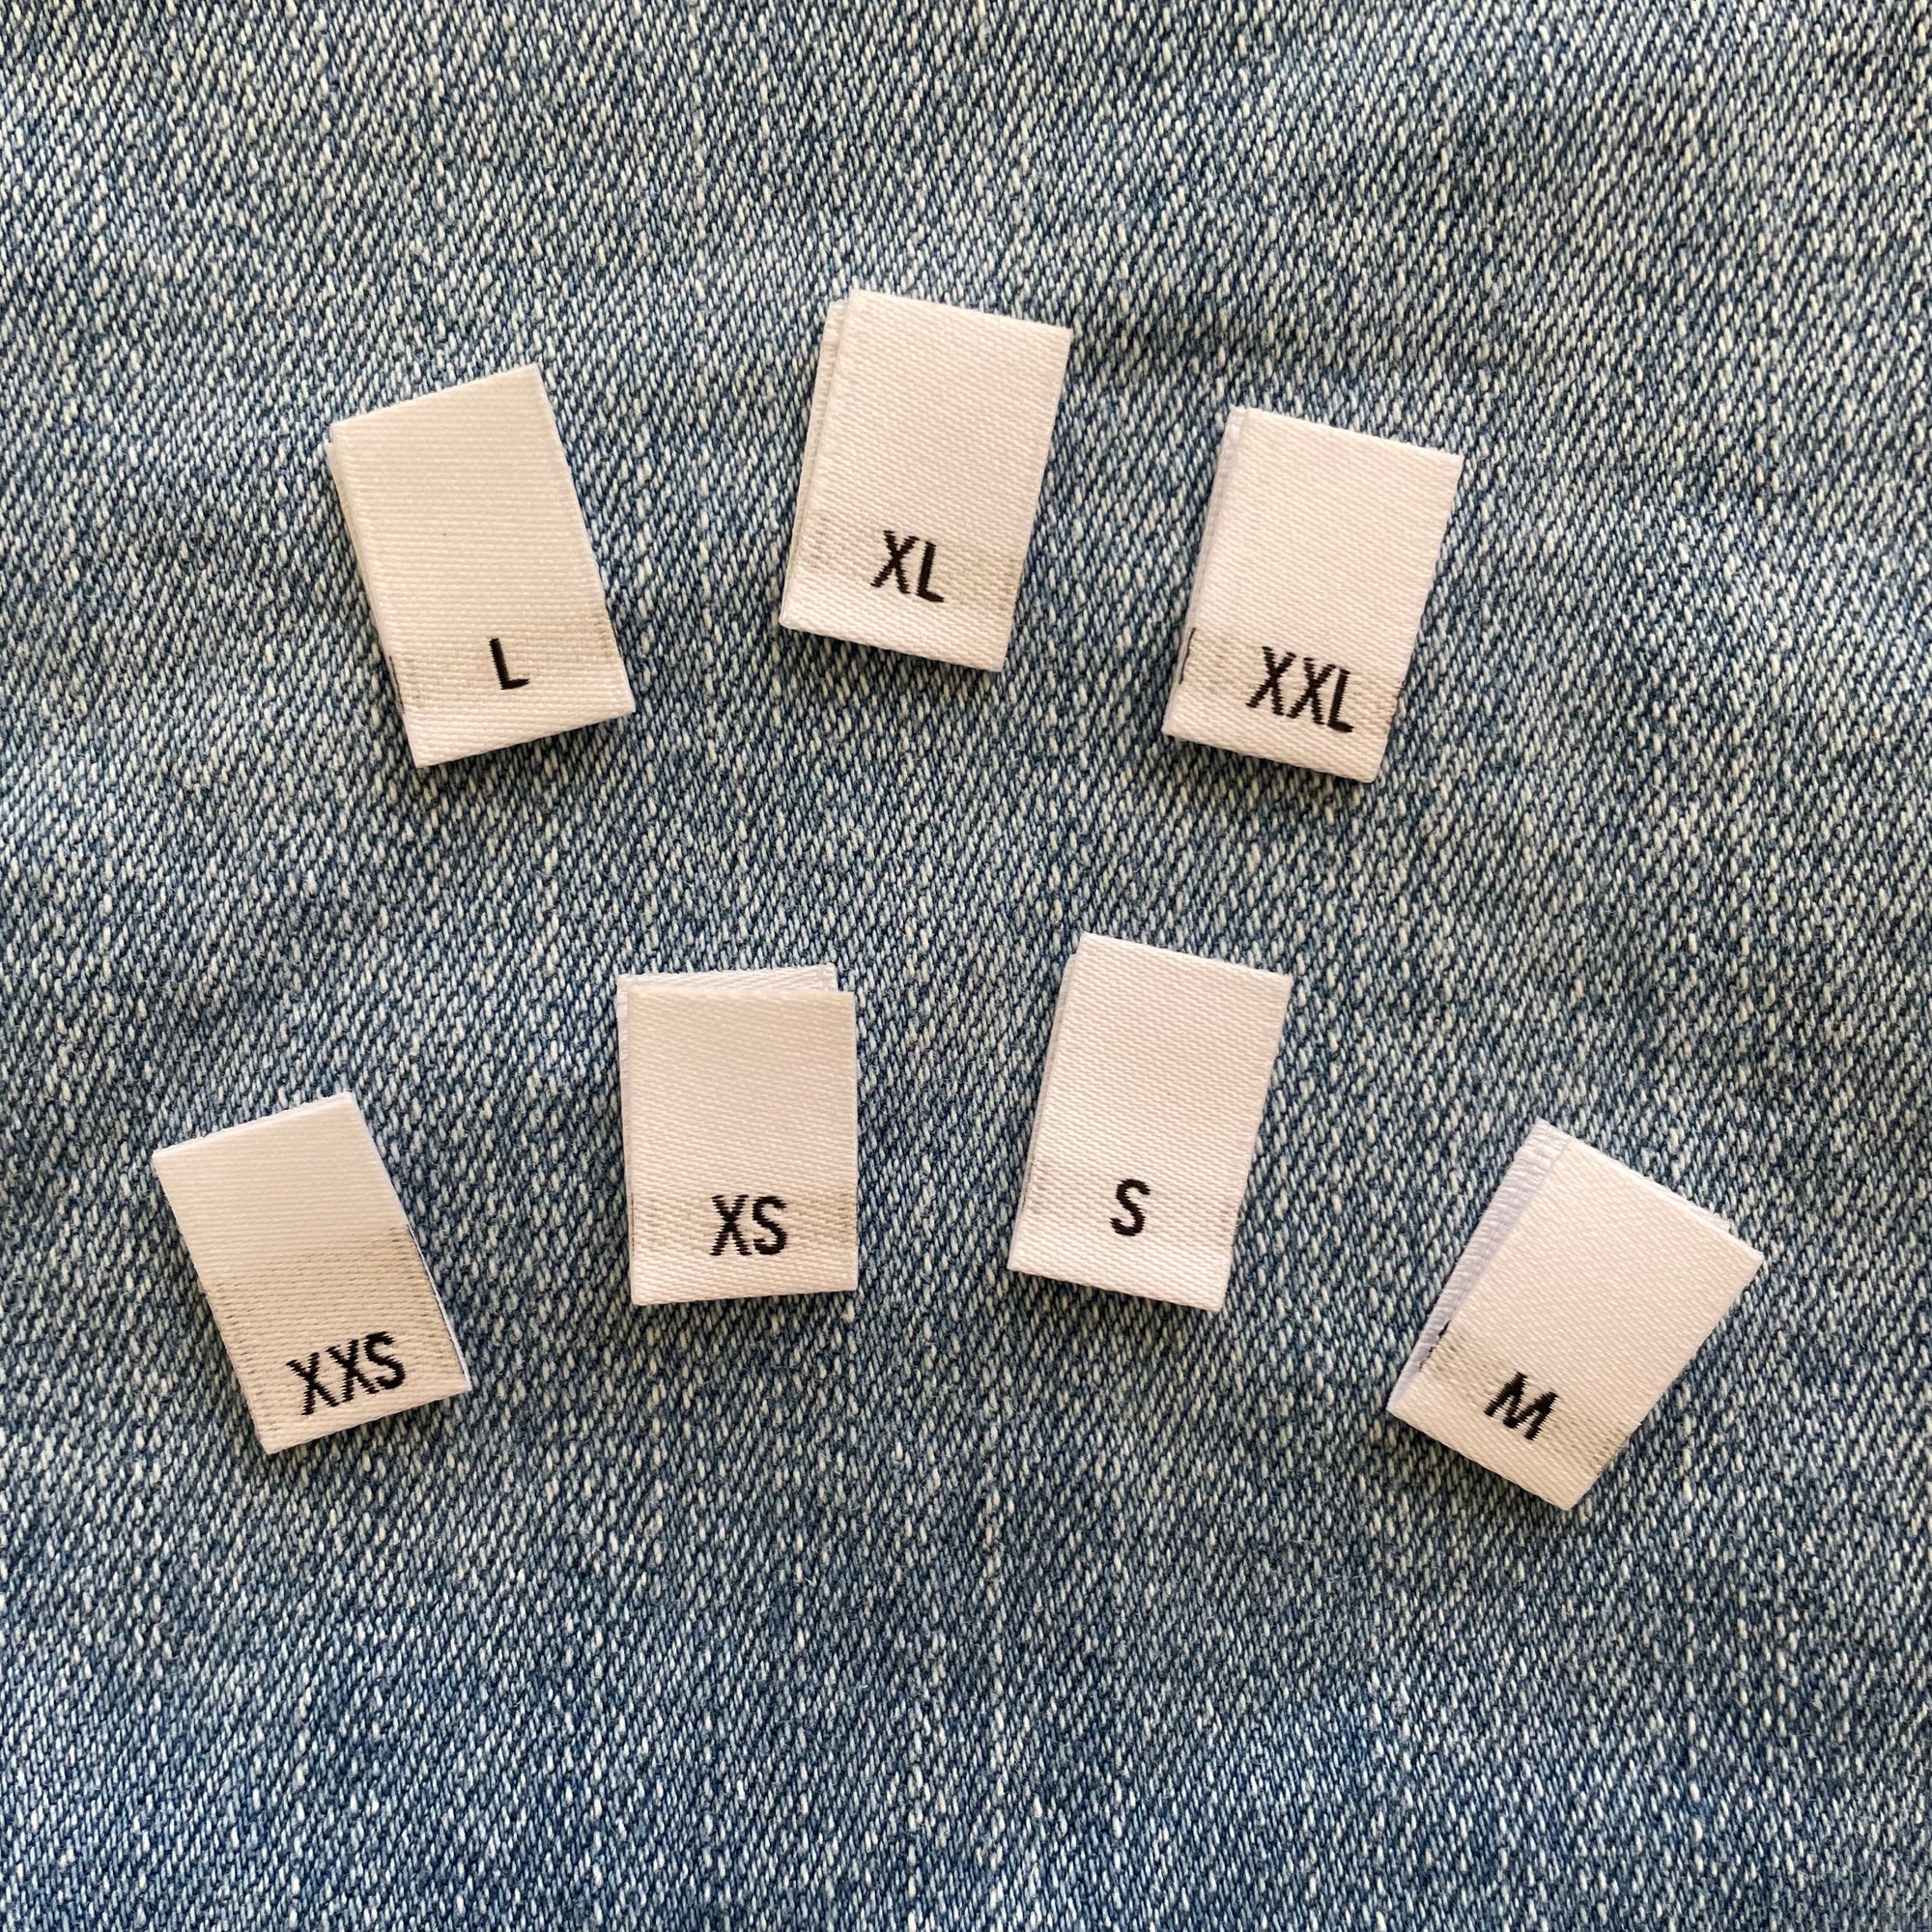 Child Clothing Size Labels (White) - Sew-in Labels, Clothing Tags, Woven  Tags - CRUZ LABEL